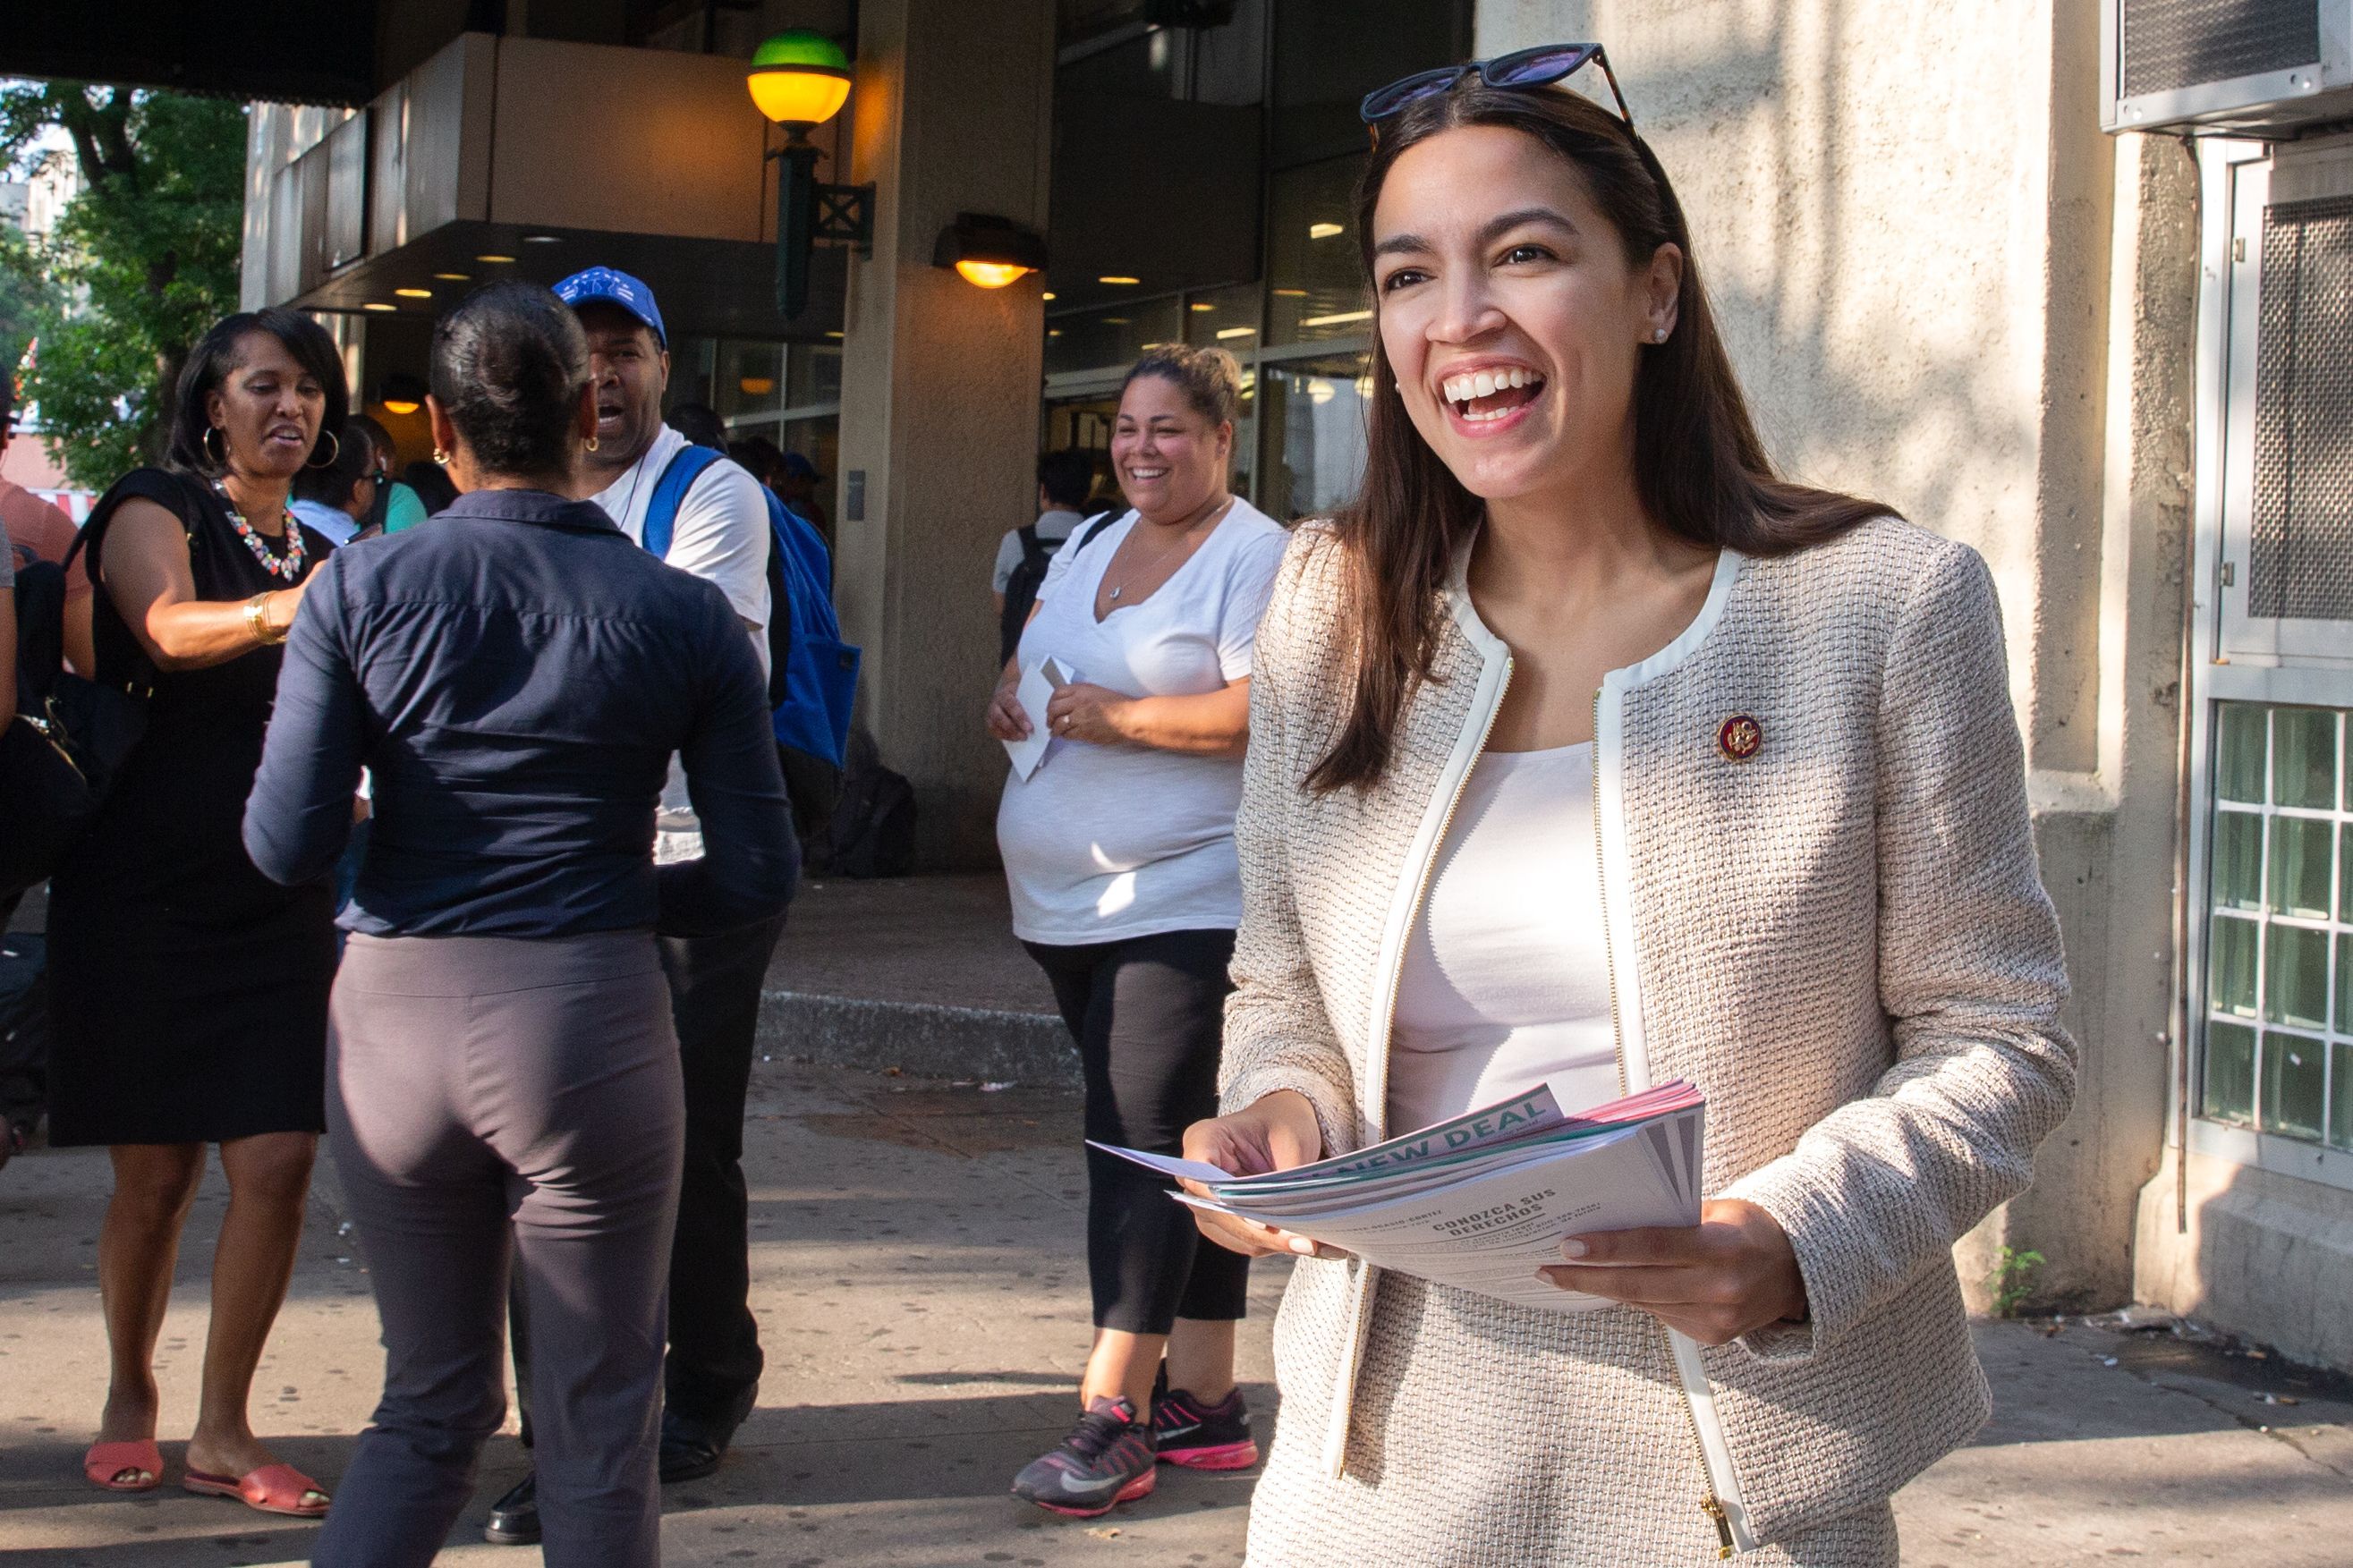 Rep. Alexandria Ocasio-Cortez greeted constituents at the Parkchester station in The Bronx, July 31, 2019.